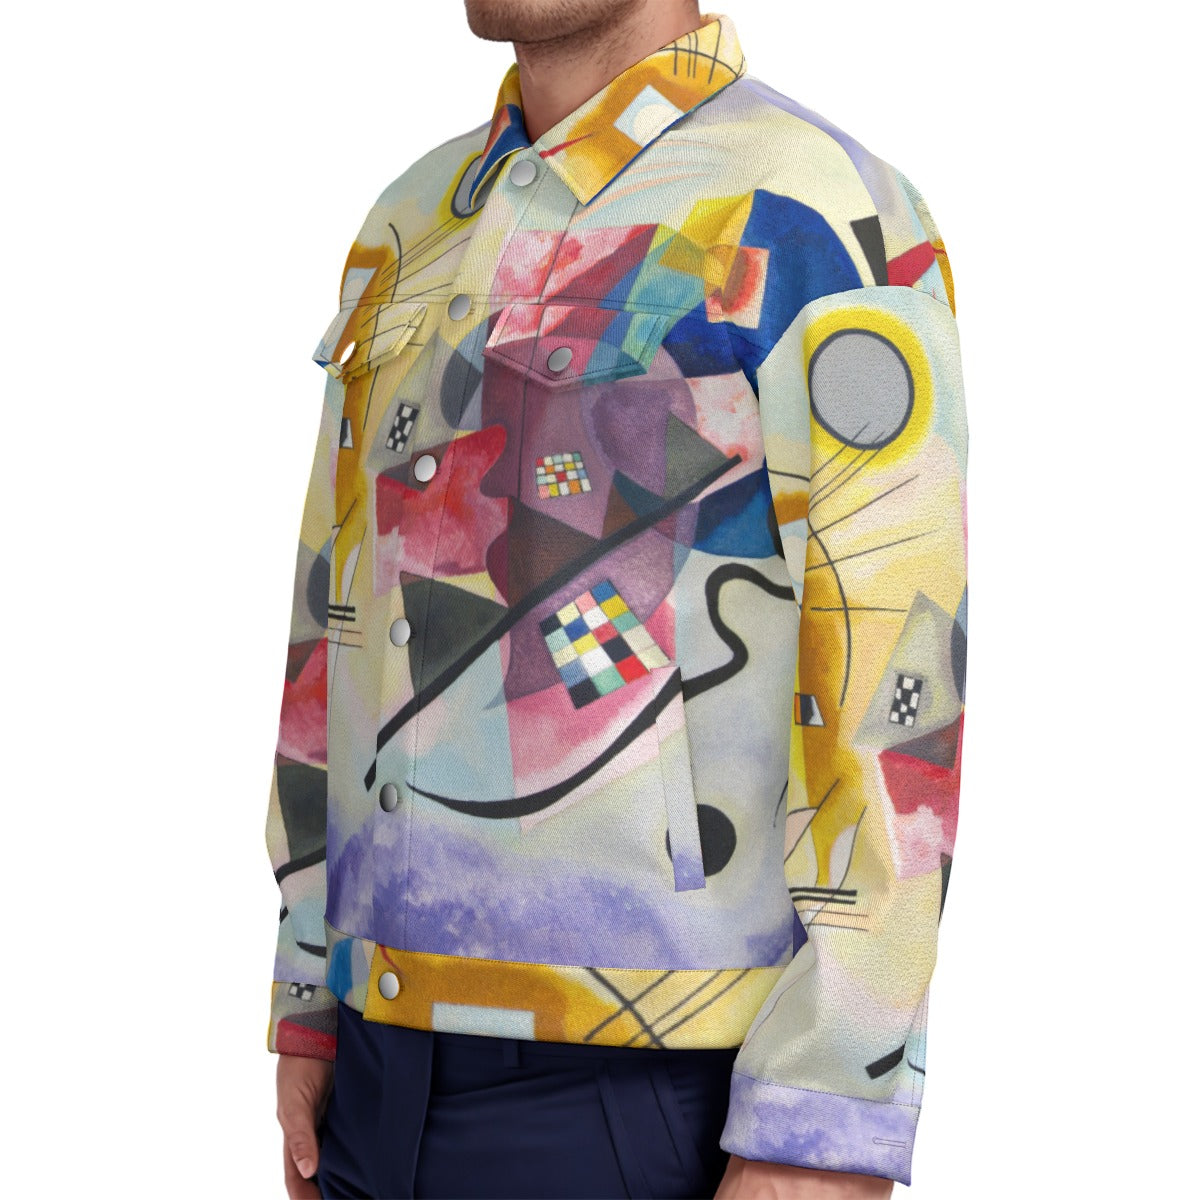 Abstract art jacket inspired by Wassily Kandinsky